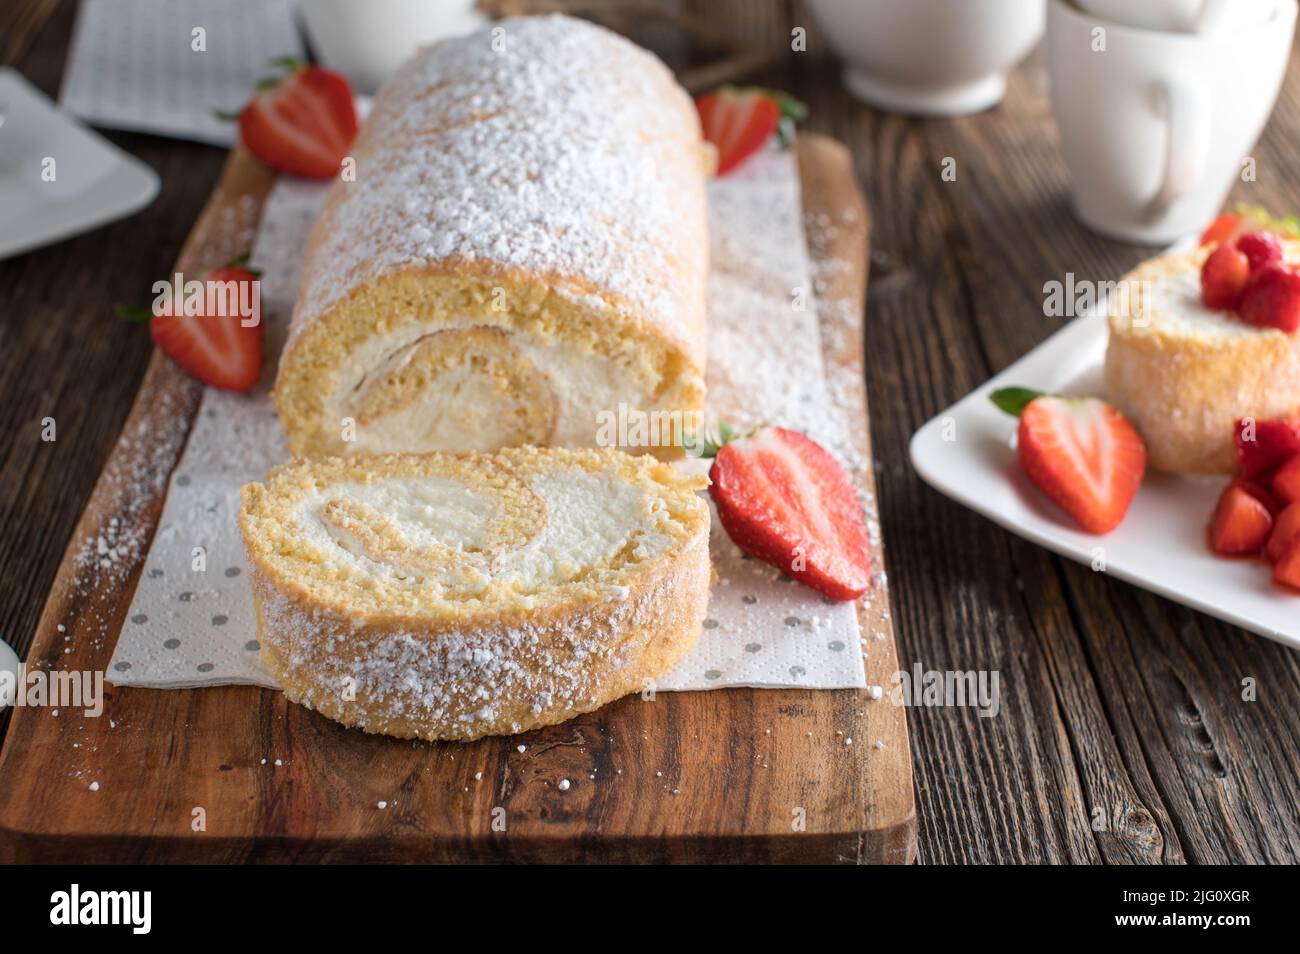 Biscuit roll or swiss roll with whipped cream filling and strawberries Stock Photo